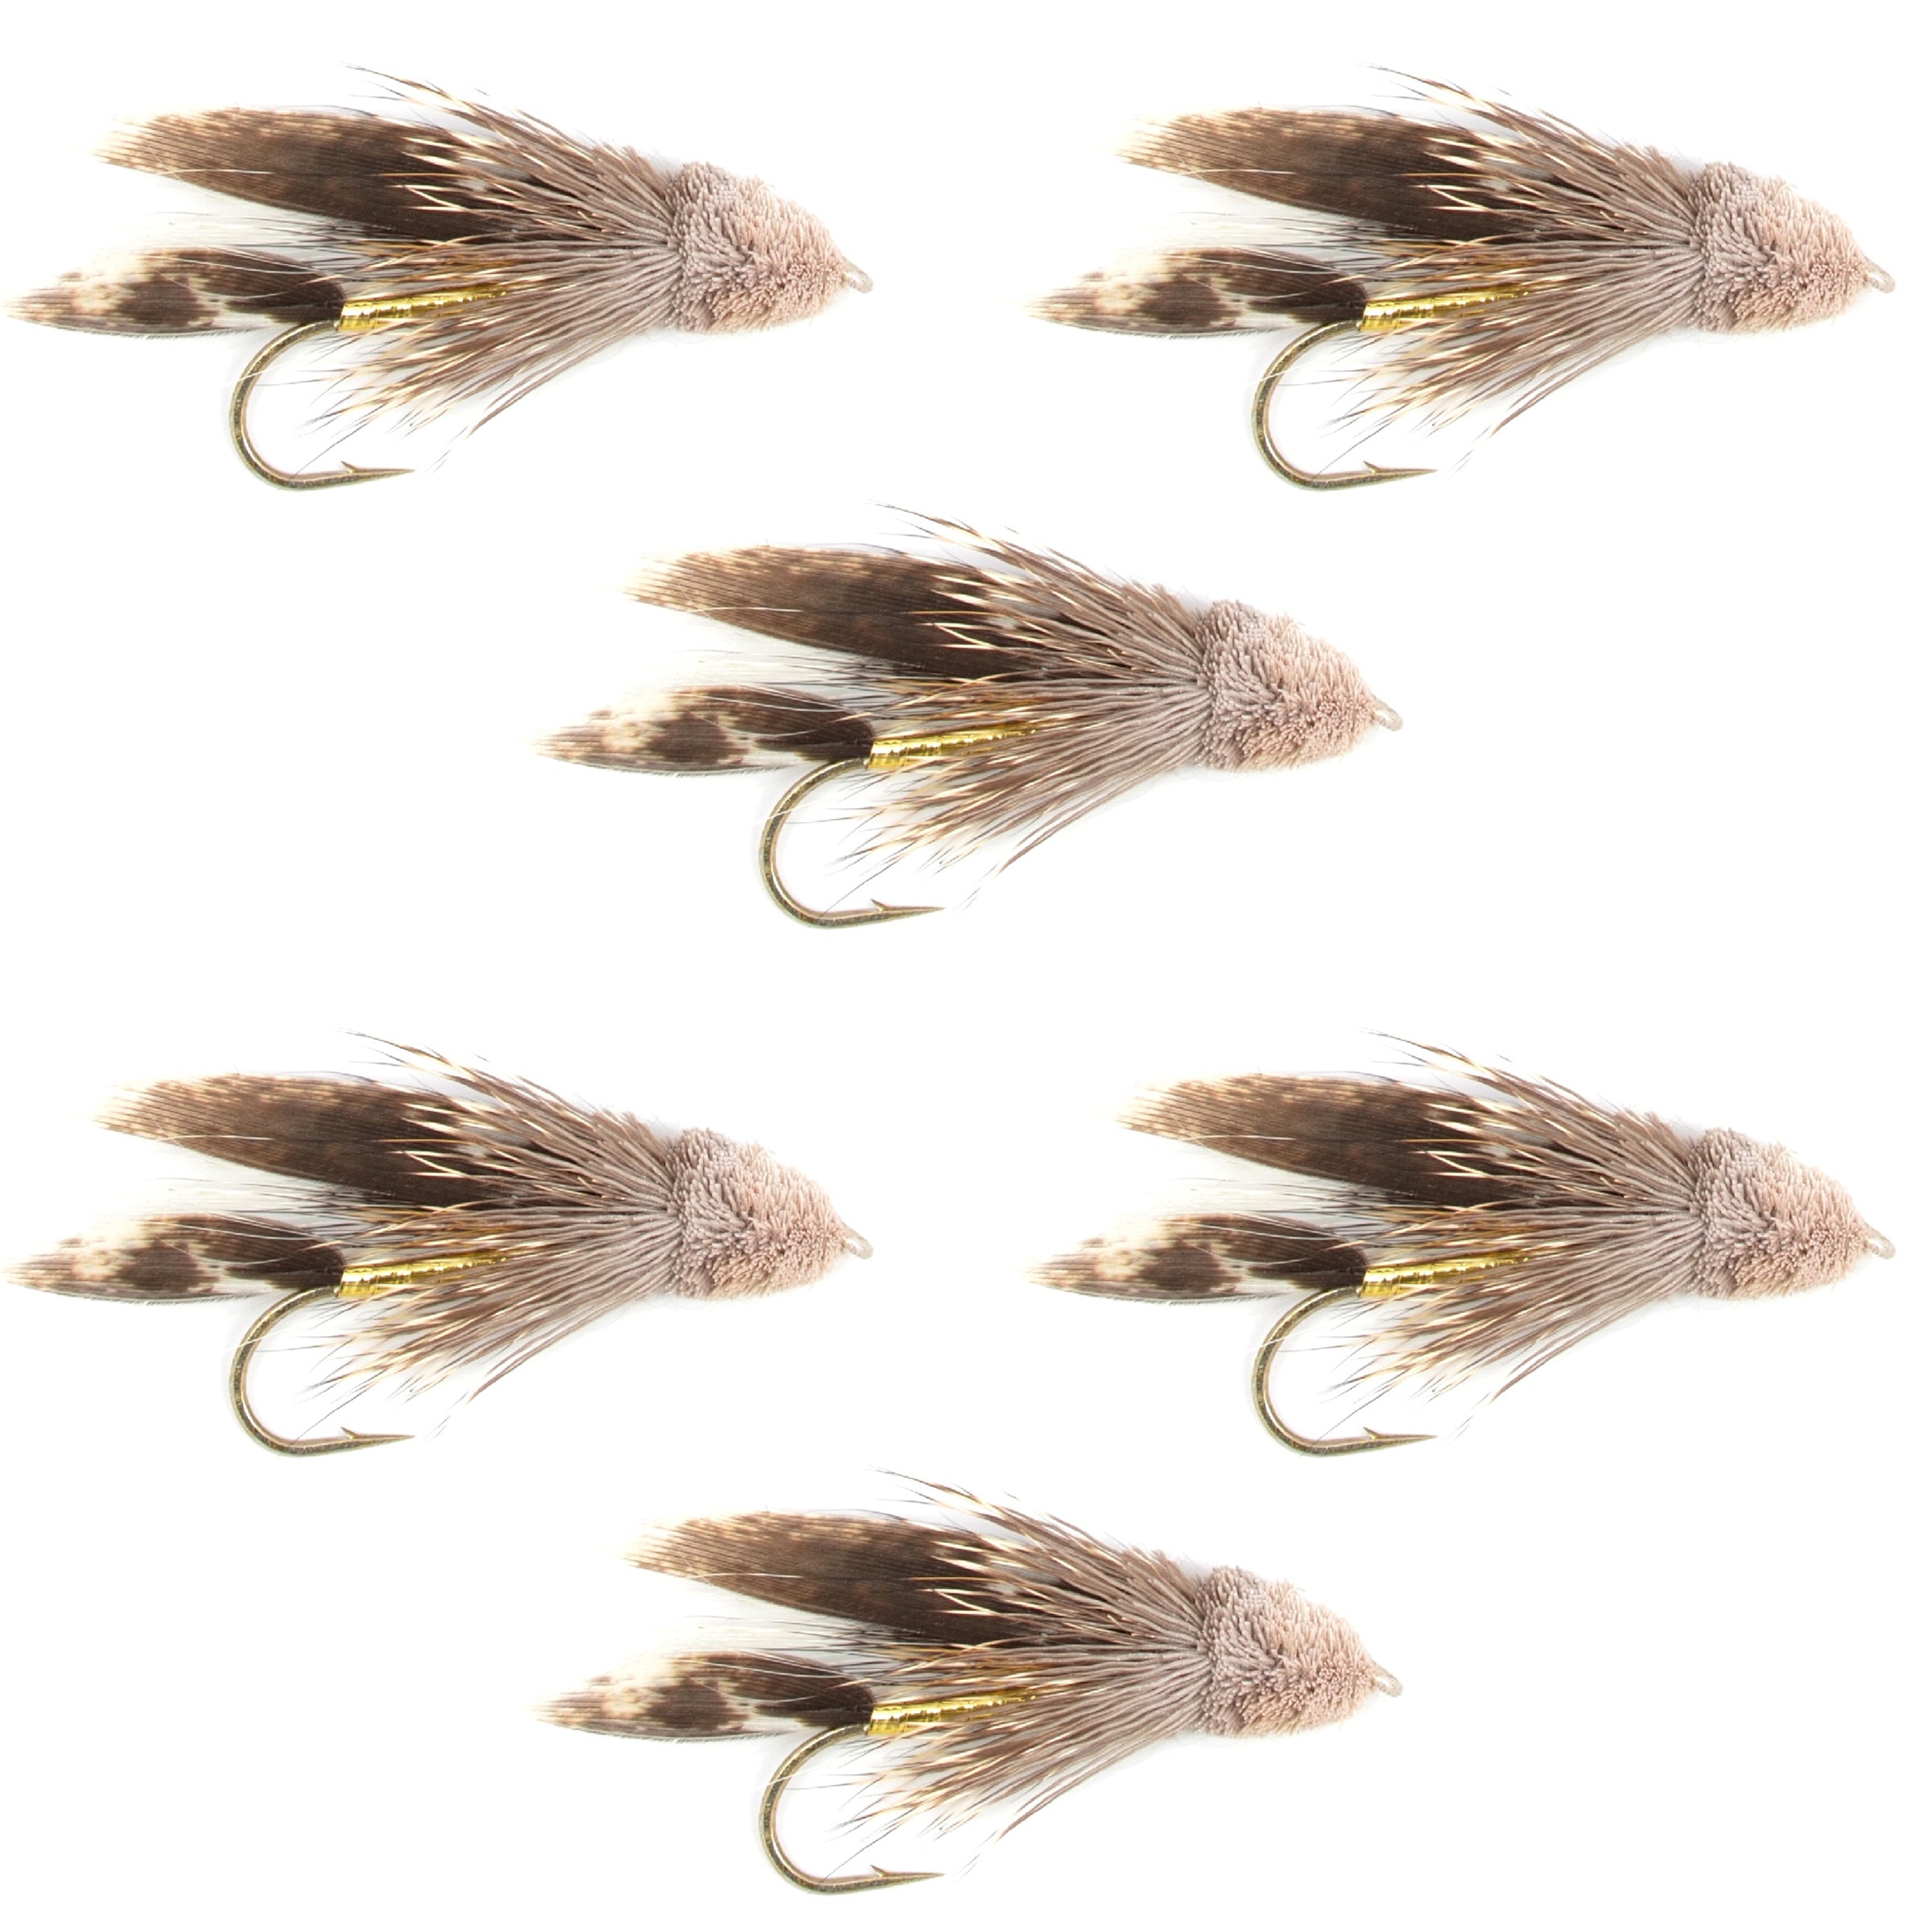 Muddler Minnow Fly Fishing Flies - Classic Bass and Trout Streamers - Set of 6 Flies Hook Size 12